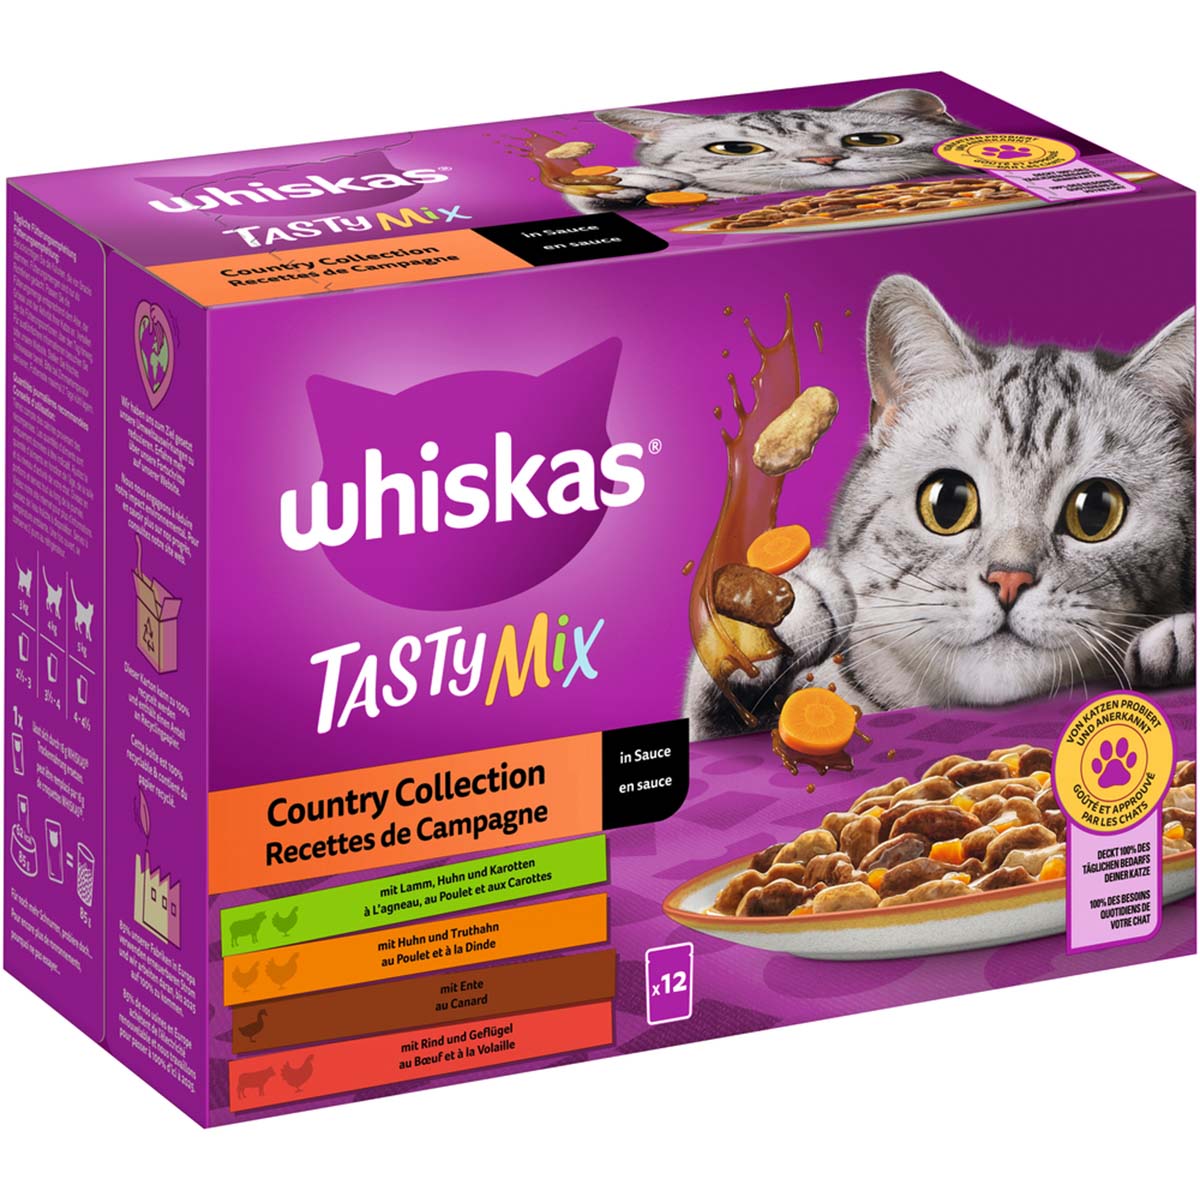 Whiskas Tasty Mix Multipack Country Collection in Sauce 12x85g von Whiskas